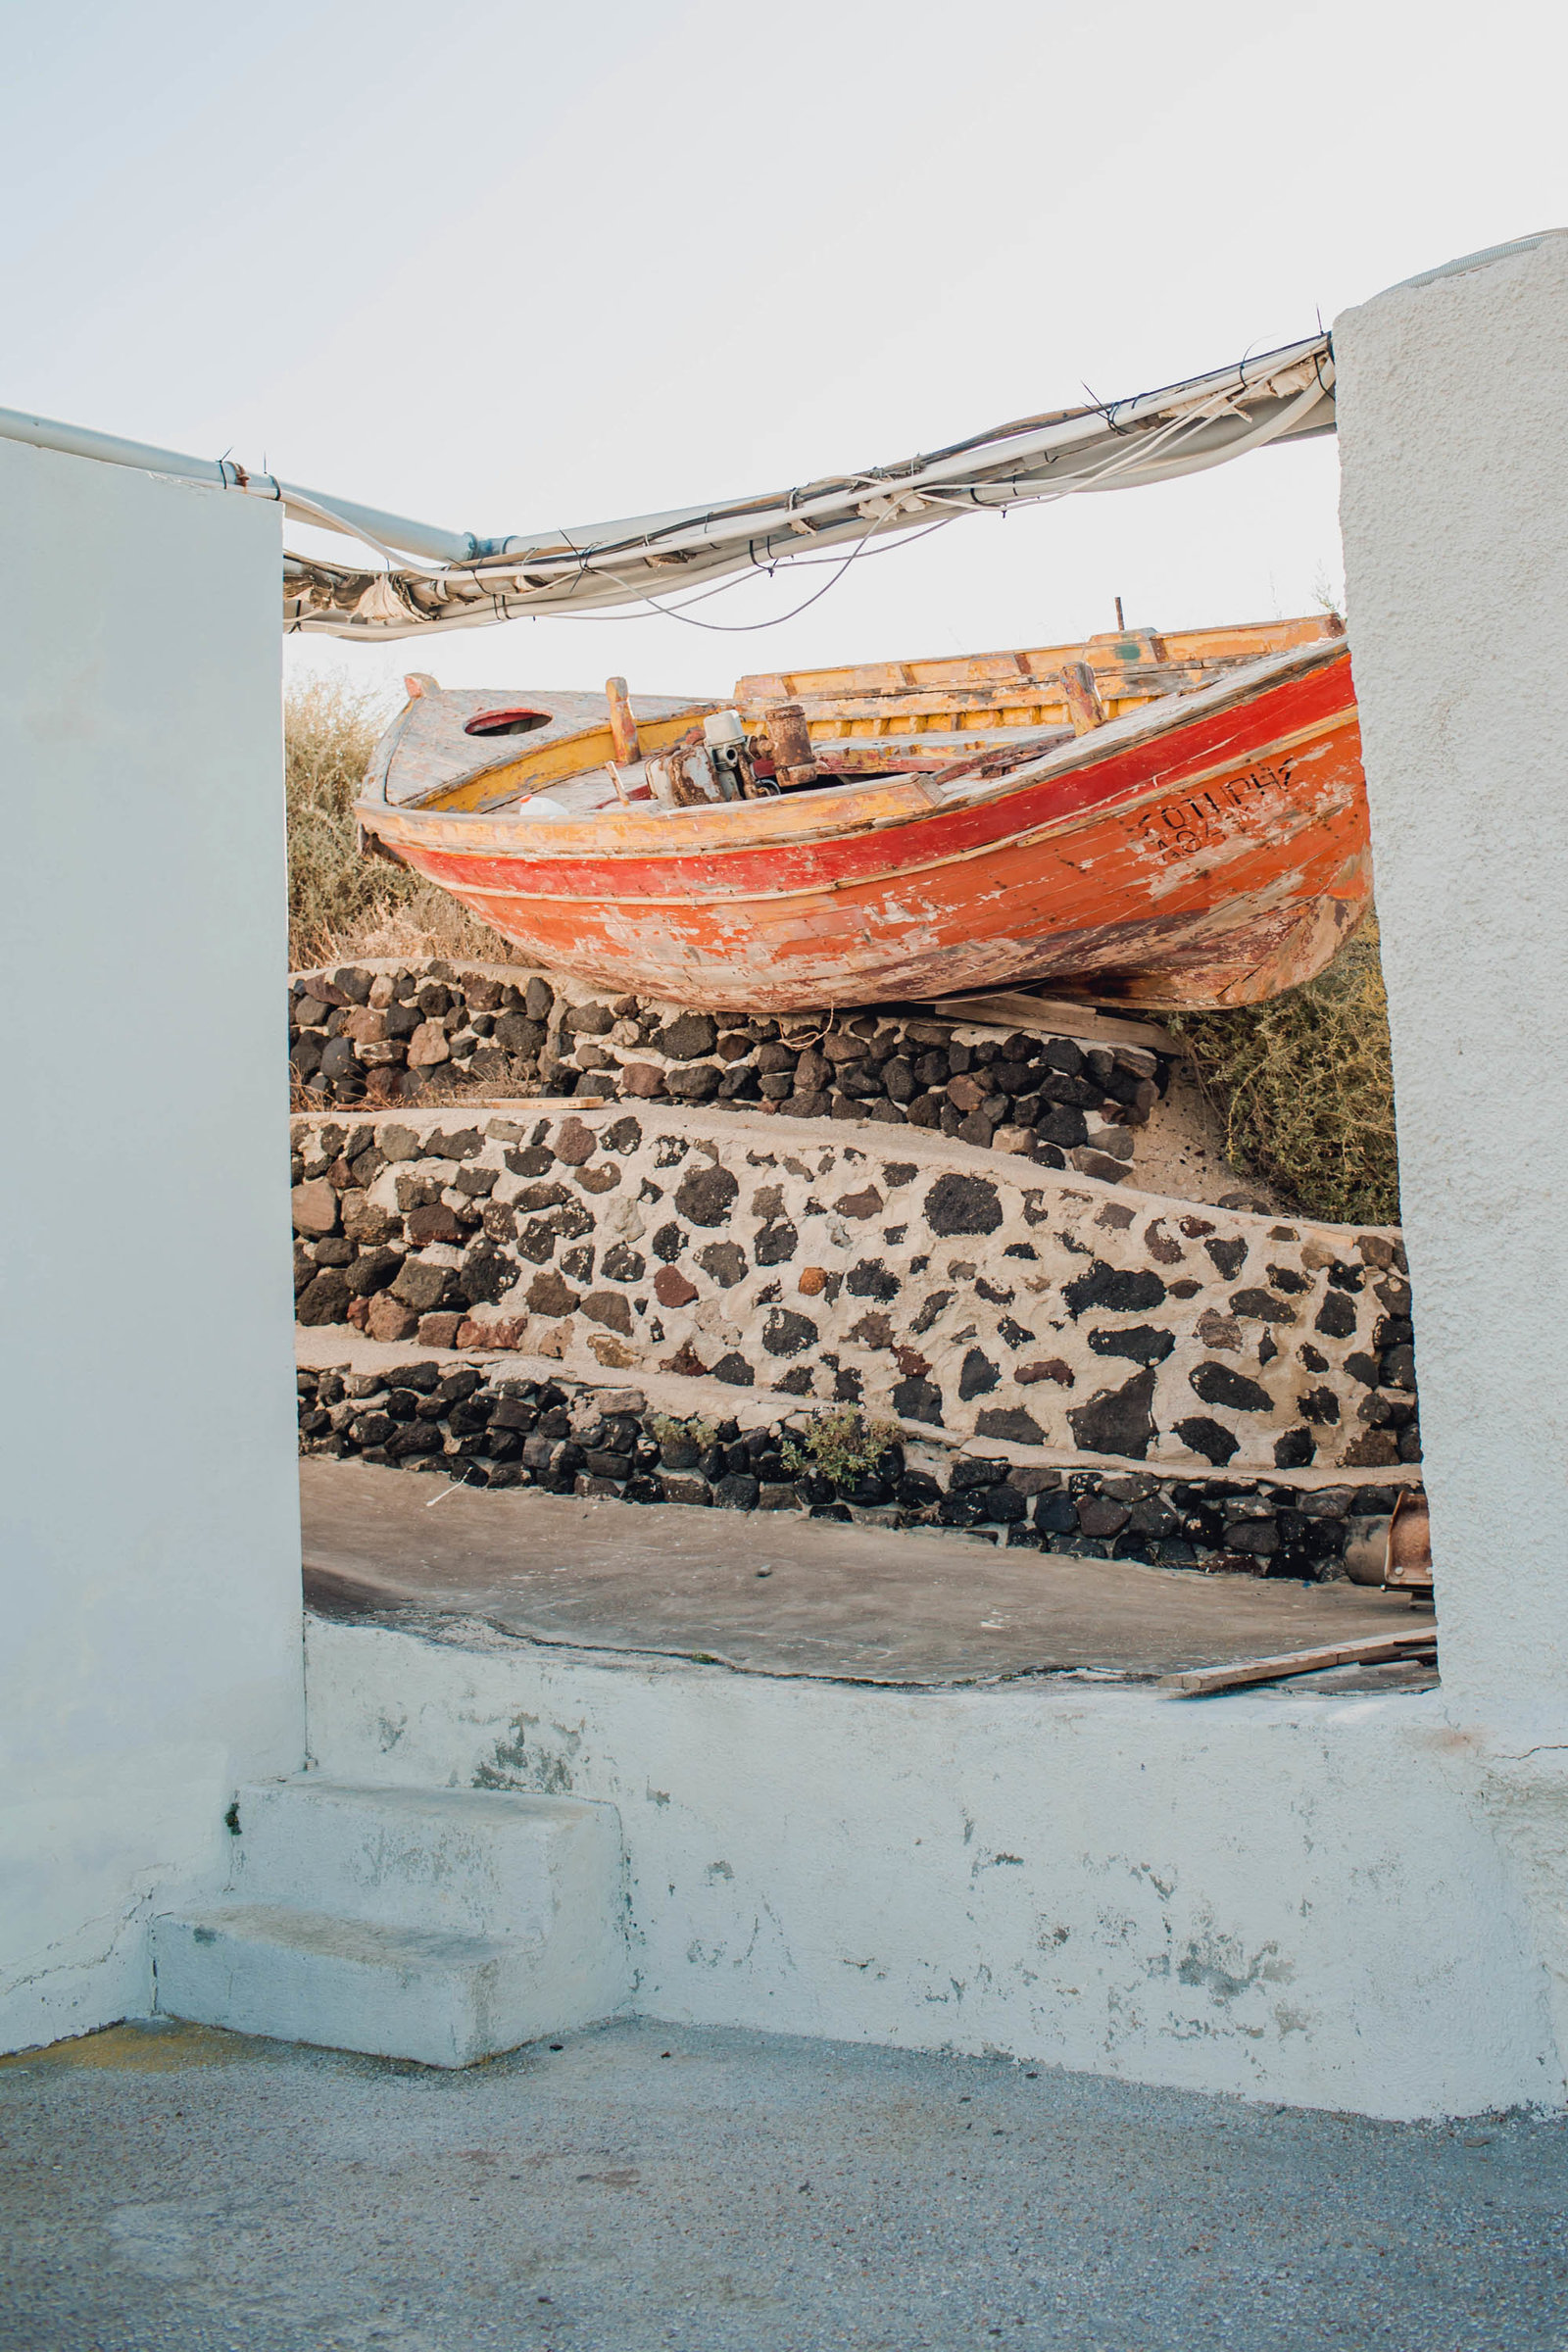 old-red-boat-destination-travel-santorini-wedding-kate-timbers-photo-2633